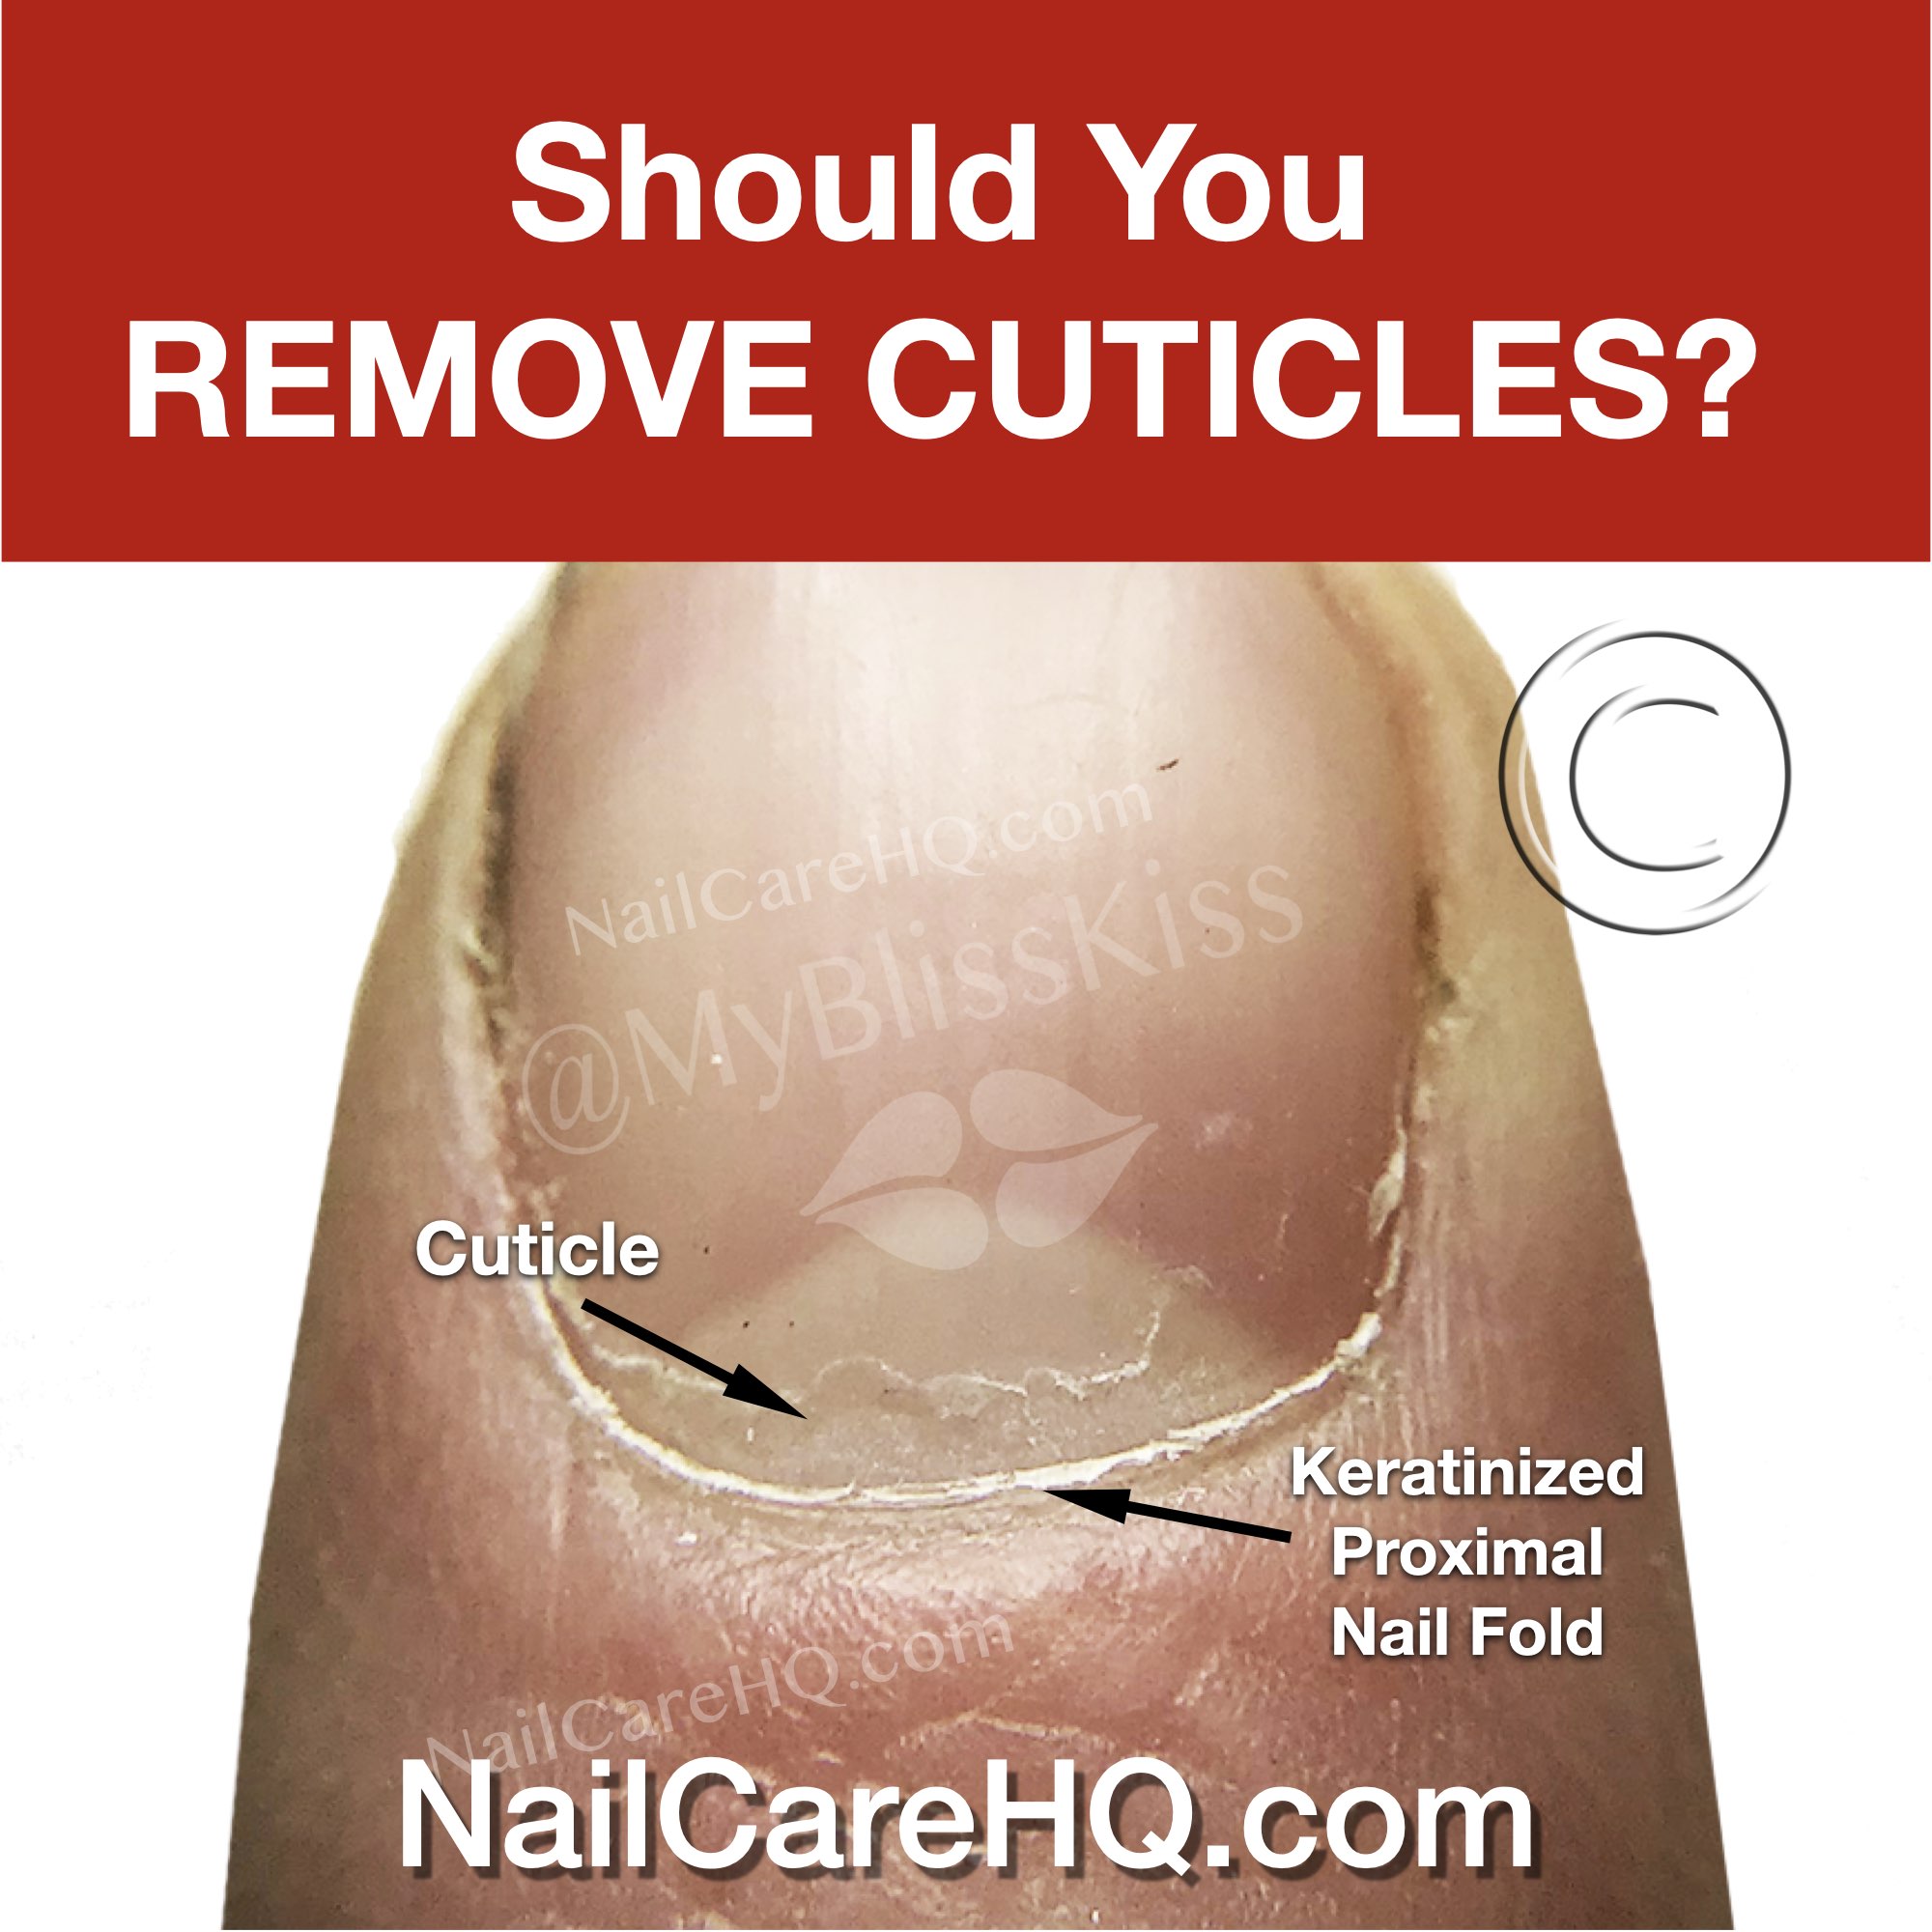 Article Title Image about if Should you remove cuticles nailcarehq